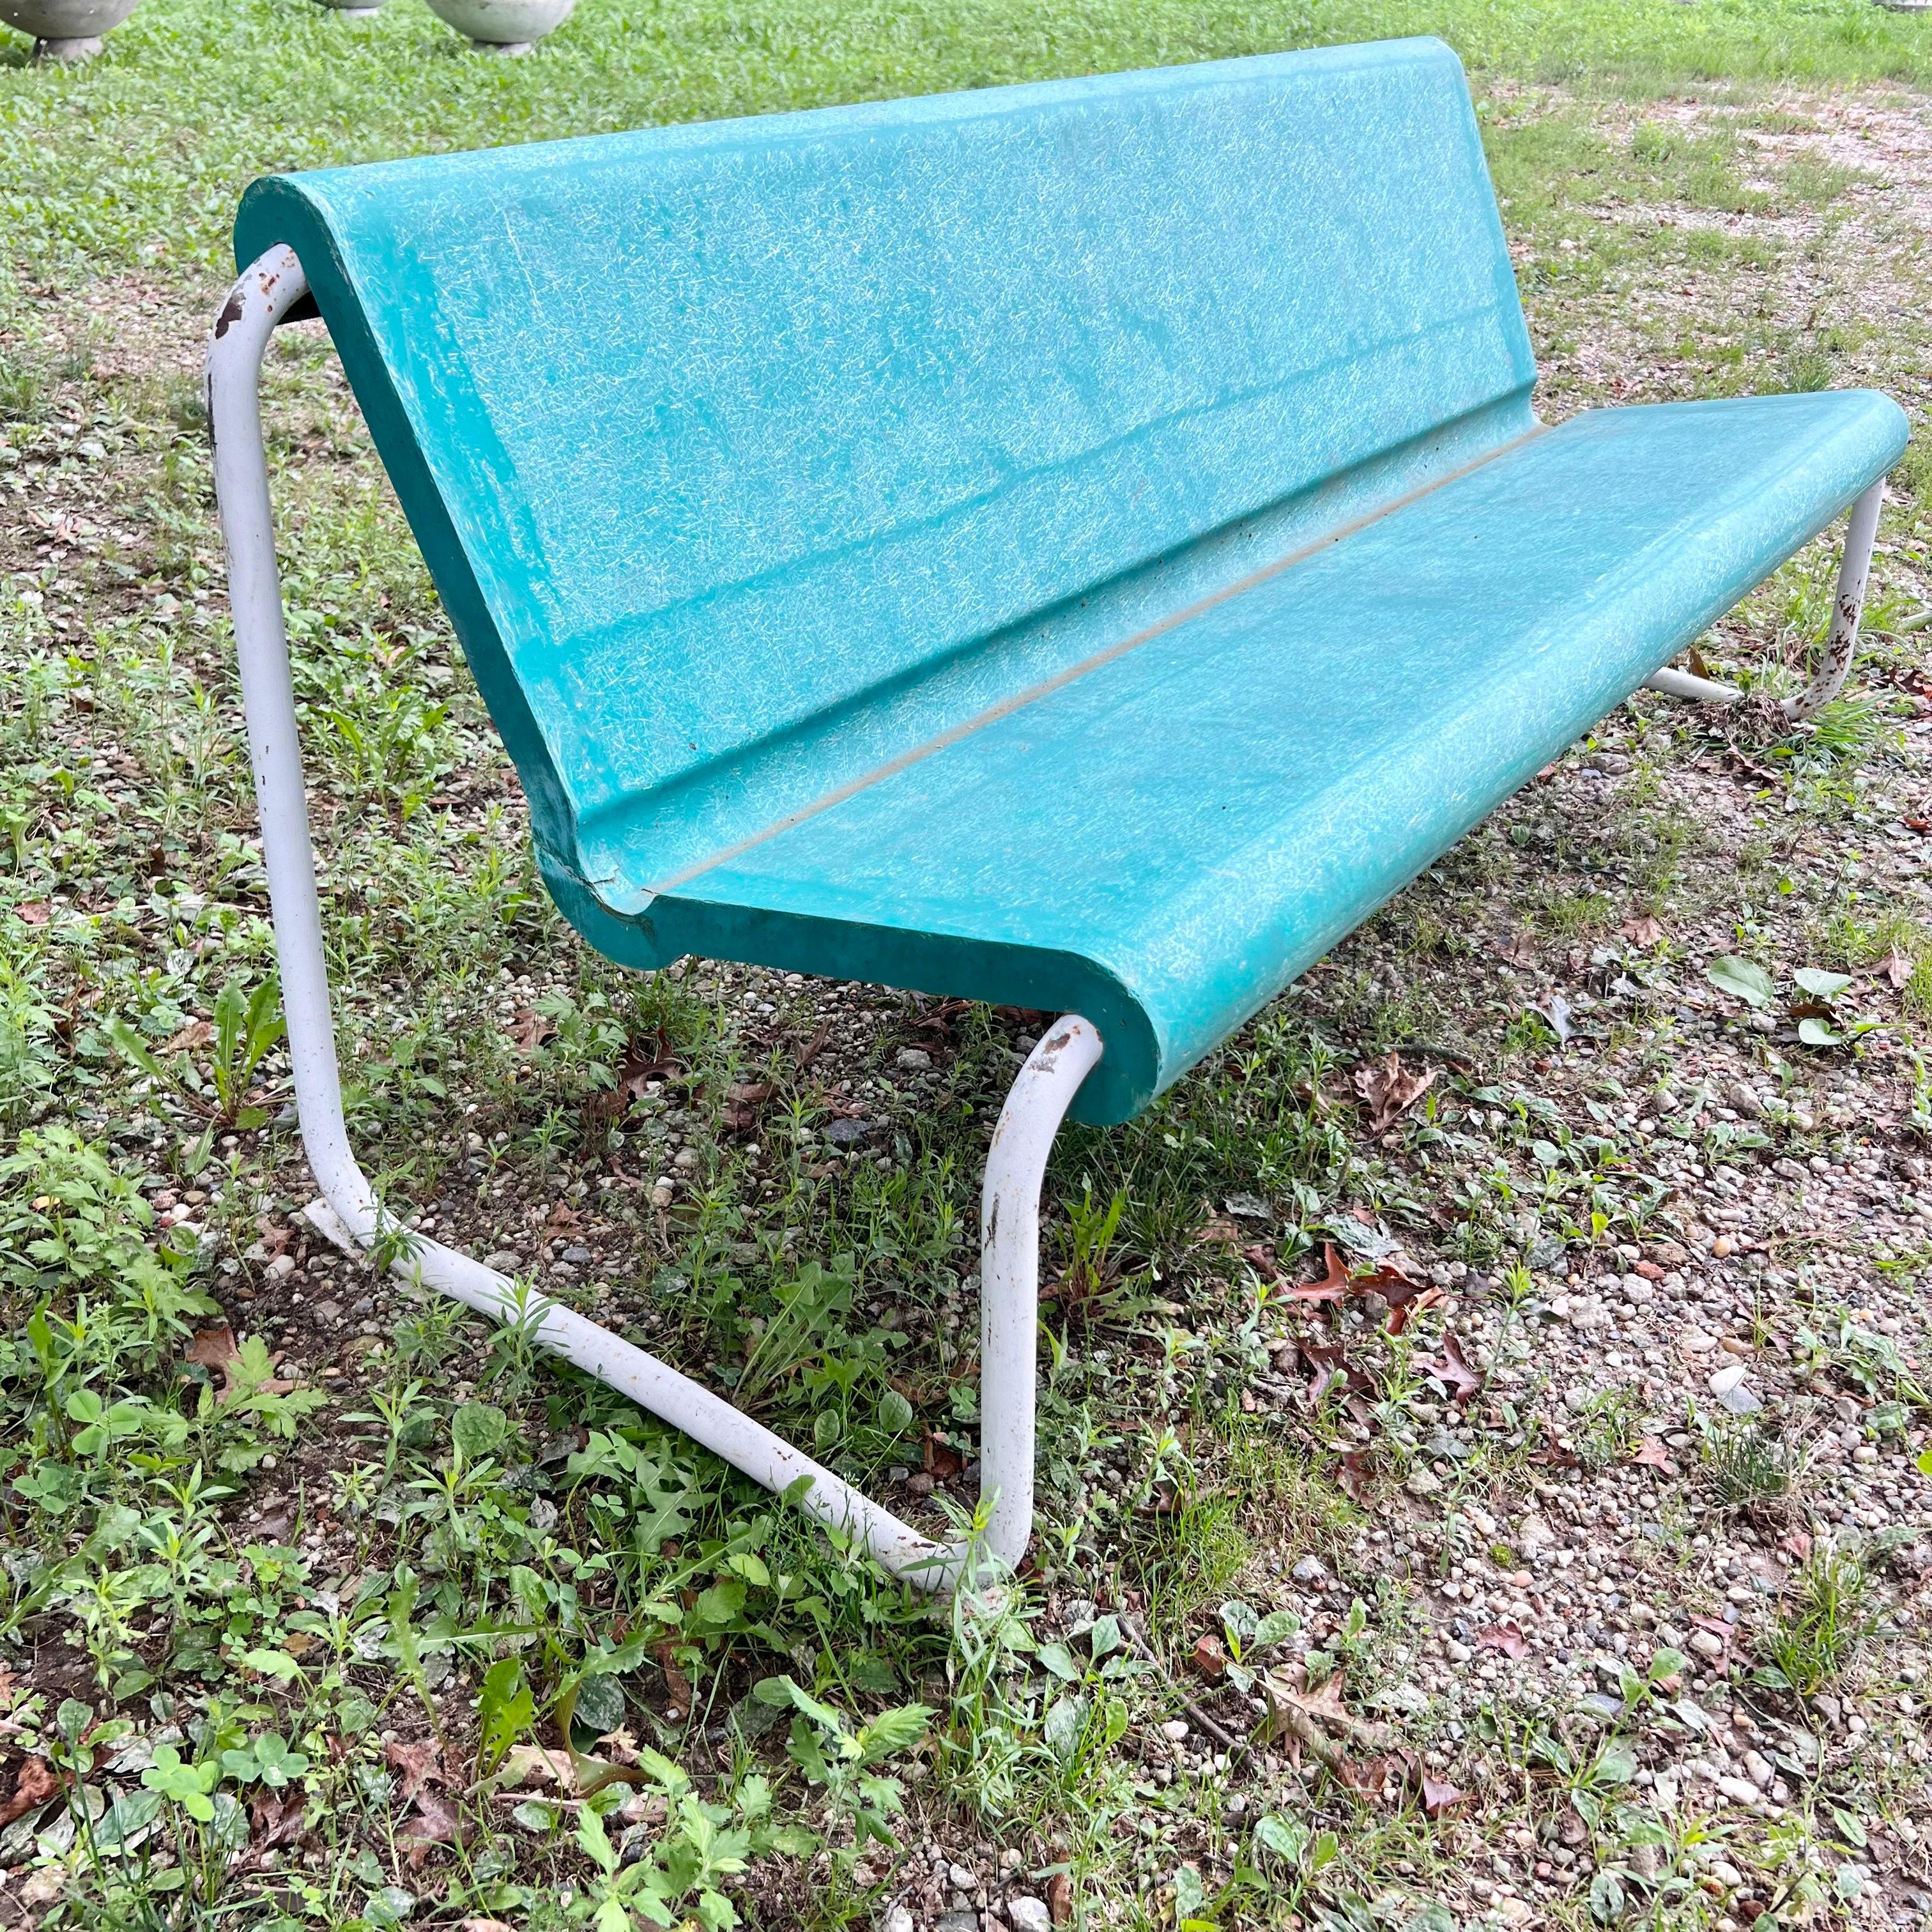 Remarkable mid-century floating bench by Swiss Architect Willy Guhl. Circa 1960s. Perfect minimal design as is common with the Swiss designer. Light weight but sturdy. The electric green seat is made of fiberglass and is suspended by a cream tubular